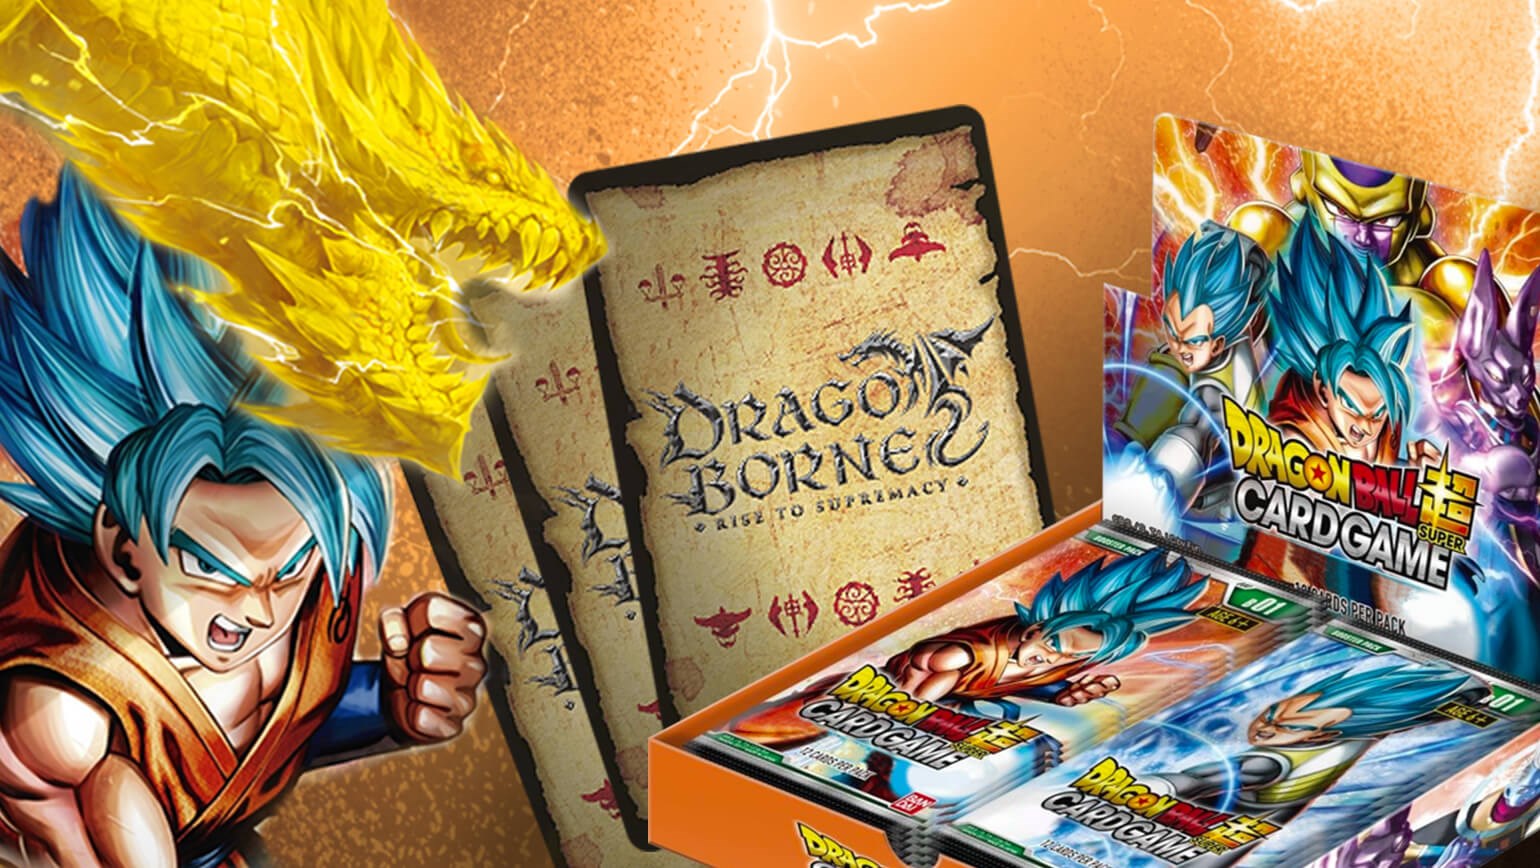 Dragon Ball Super, Dragoborne and Additional UFS Games